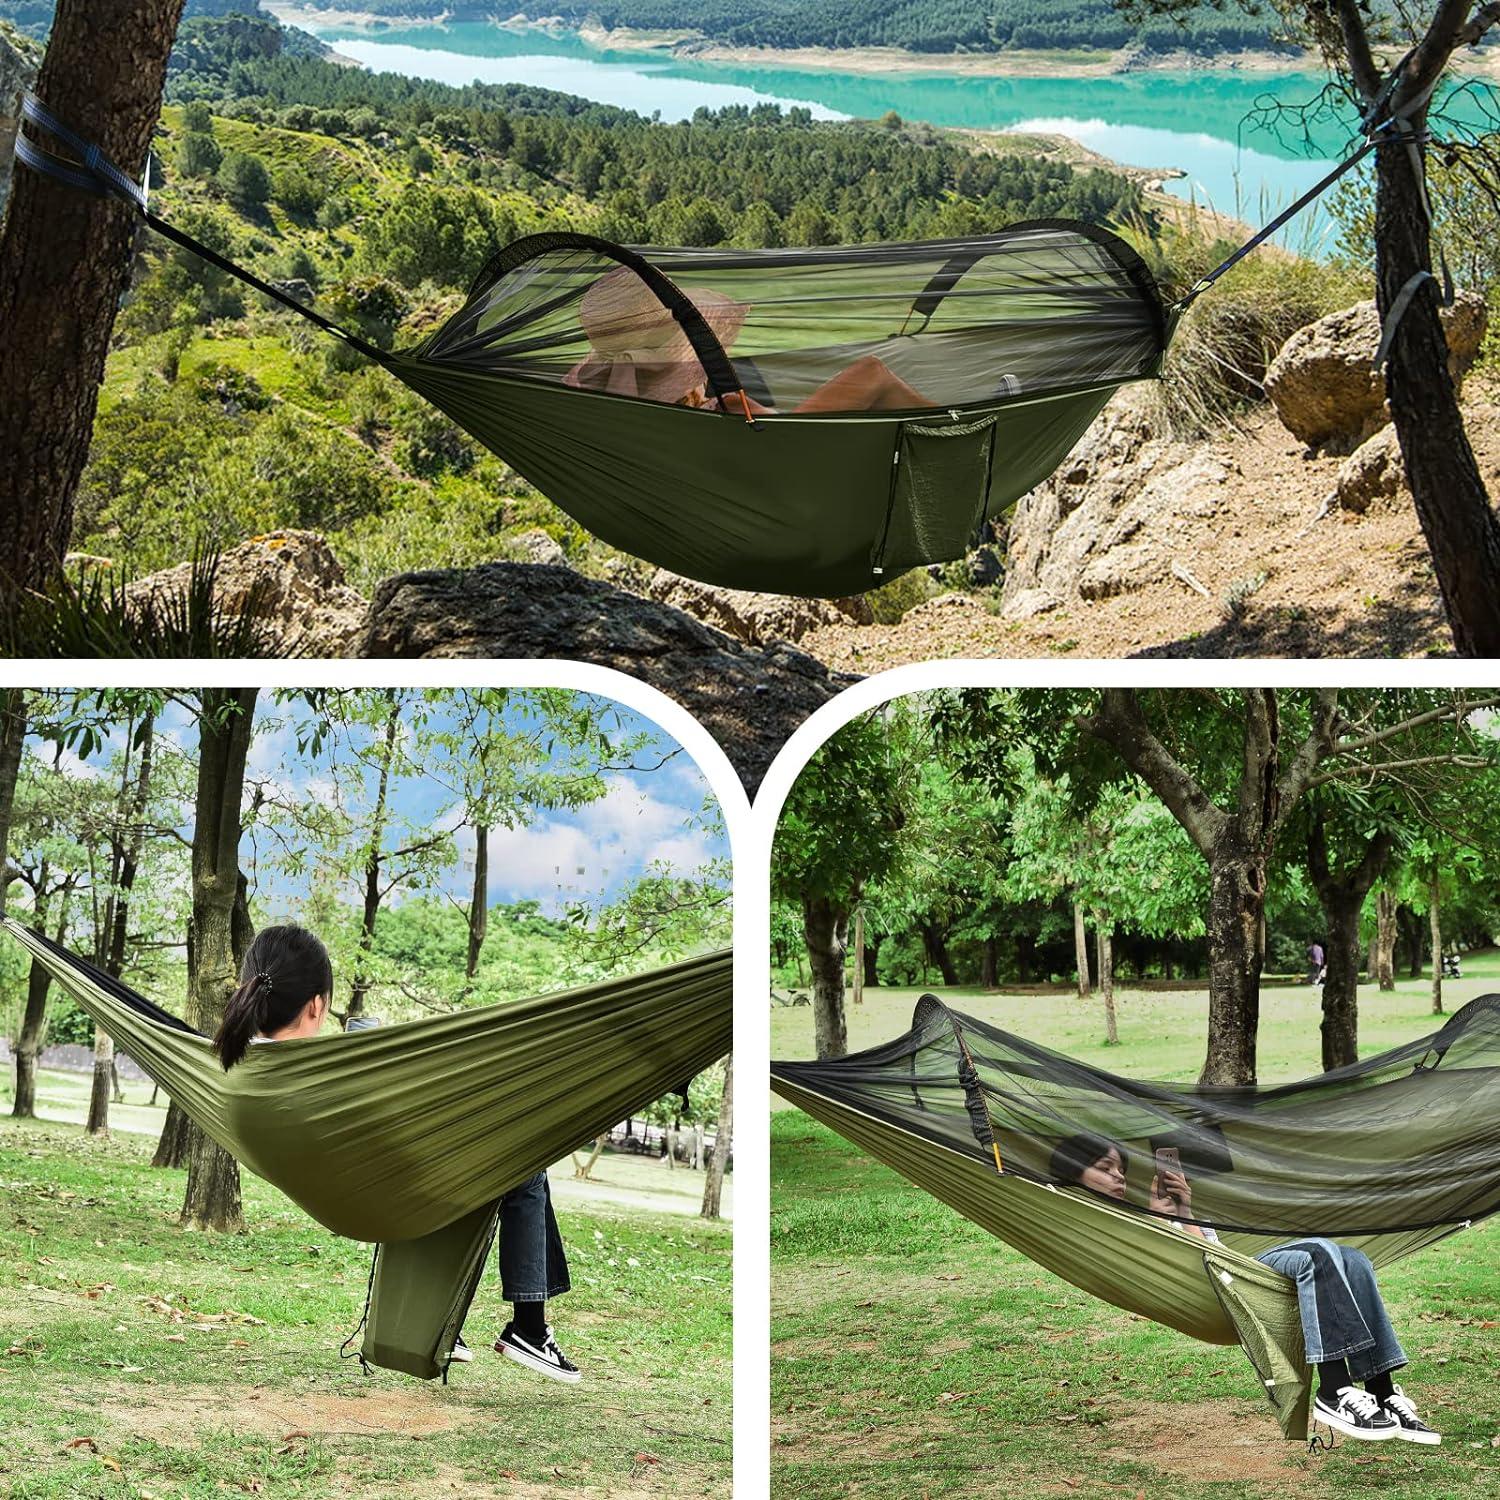 ELUTENG Camping Hammock with Mosquito Net Portable Lightweight 2 Person  Pop-up Parachute Hammocks Hanging Tree Straps Swing Hammock Bed for Outdoor  Backpacking Camping Adventure Hiking